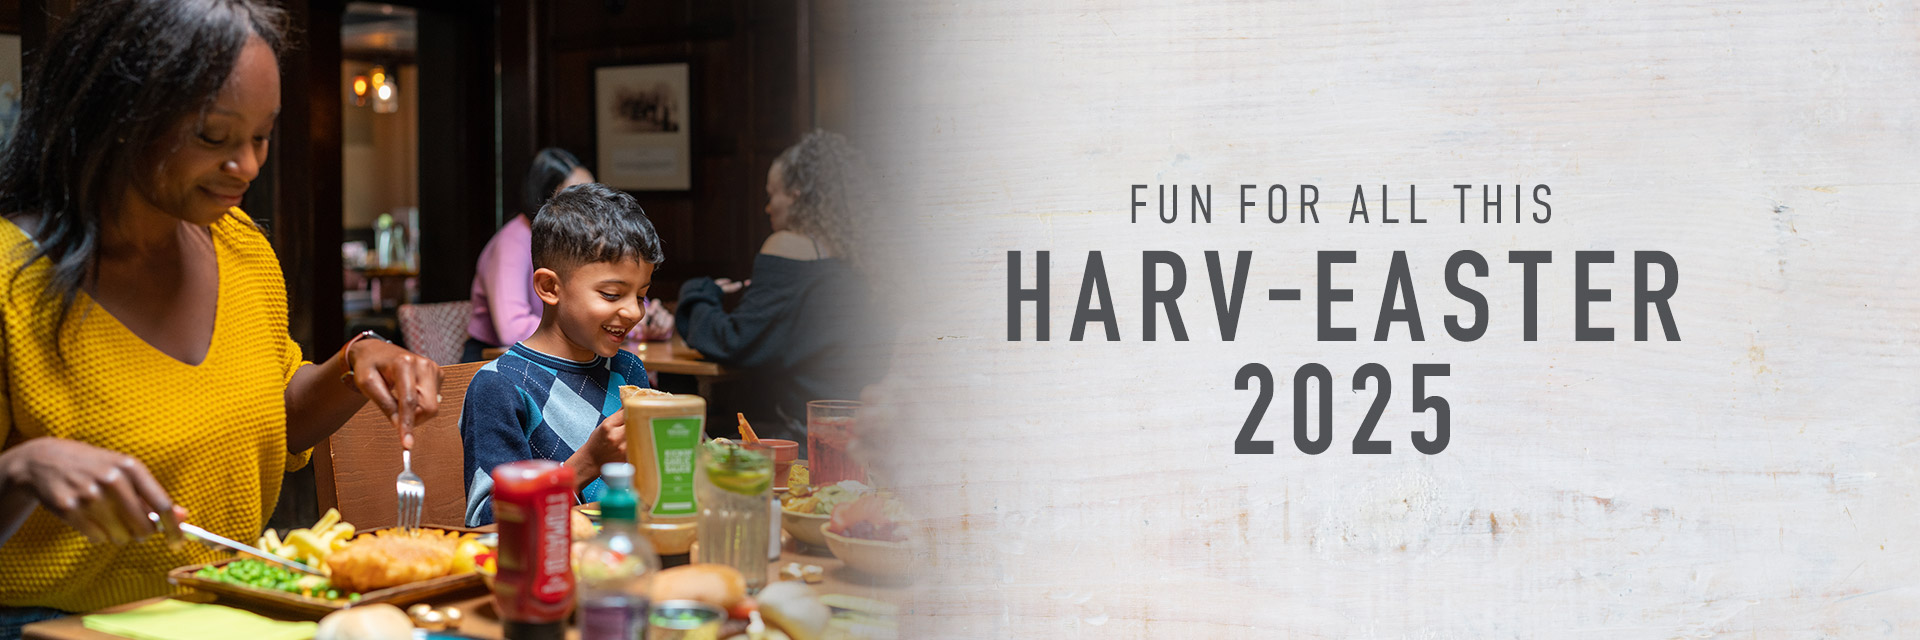 Easter at Harvester Apollo in Warrington 2025